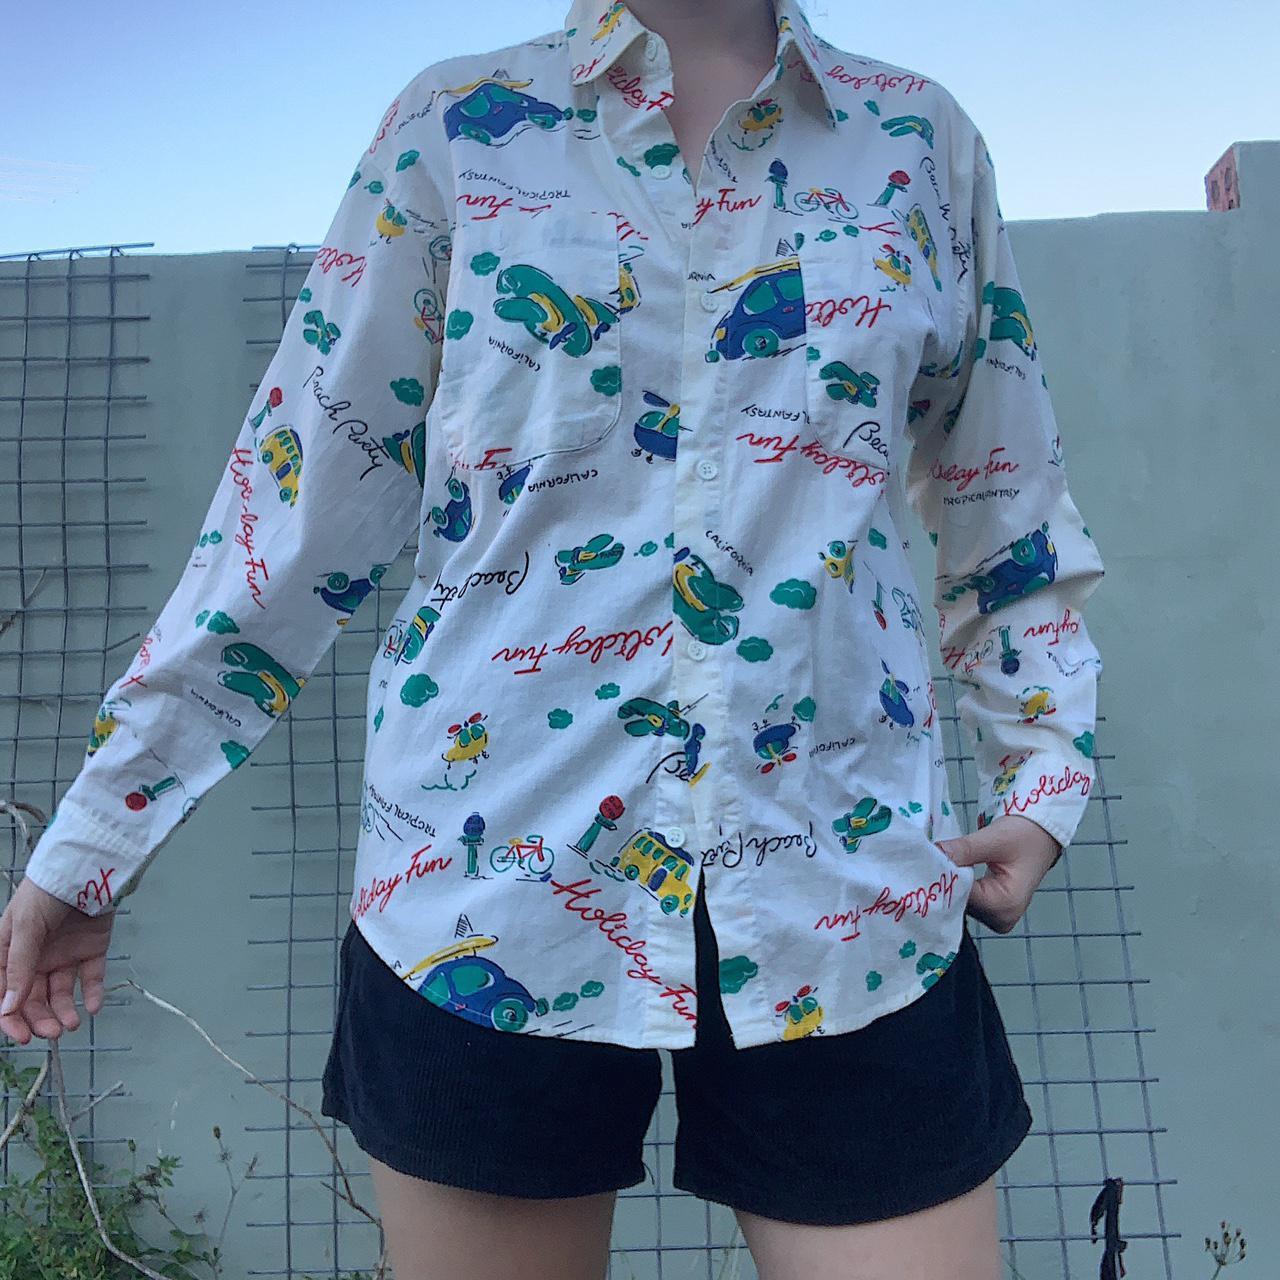 Vintage men’s white button up shirt with graphic - Depop